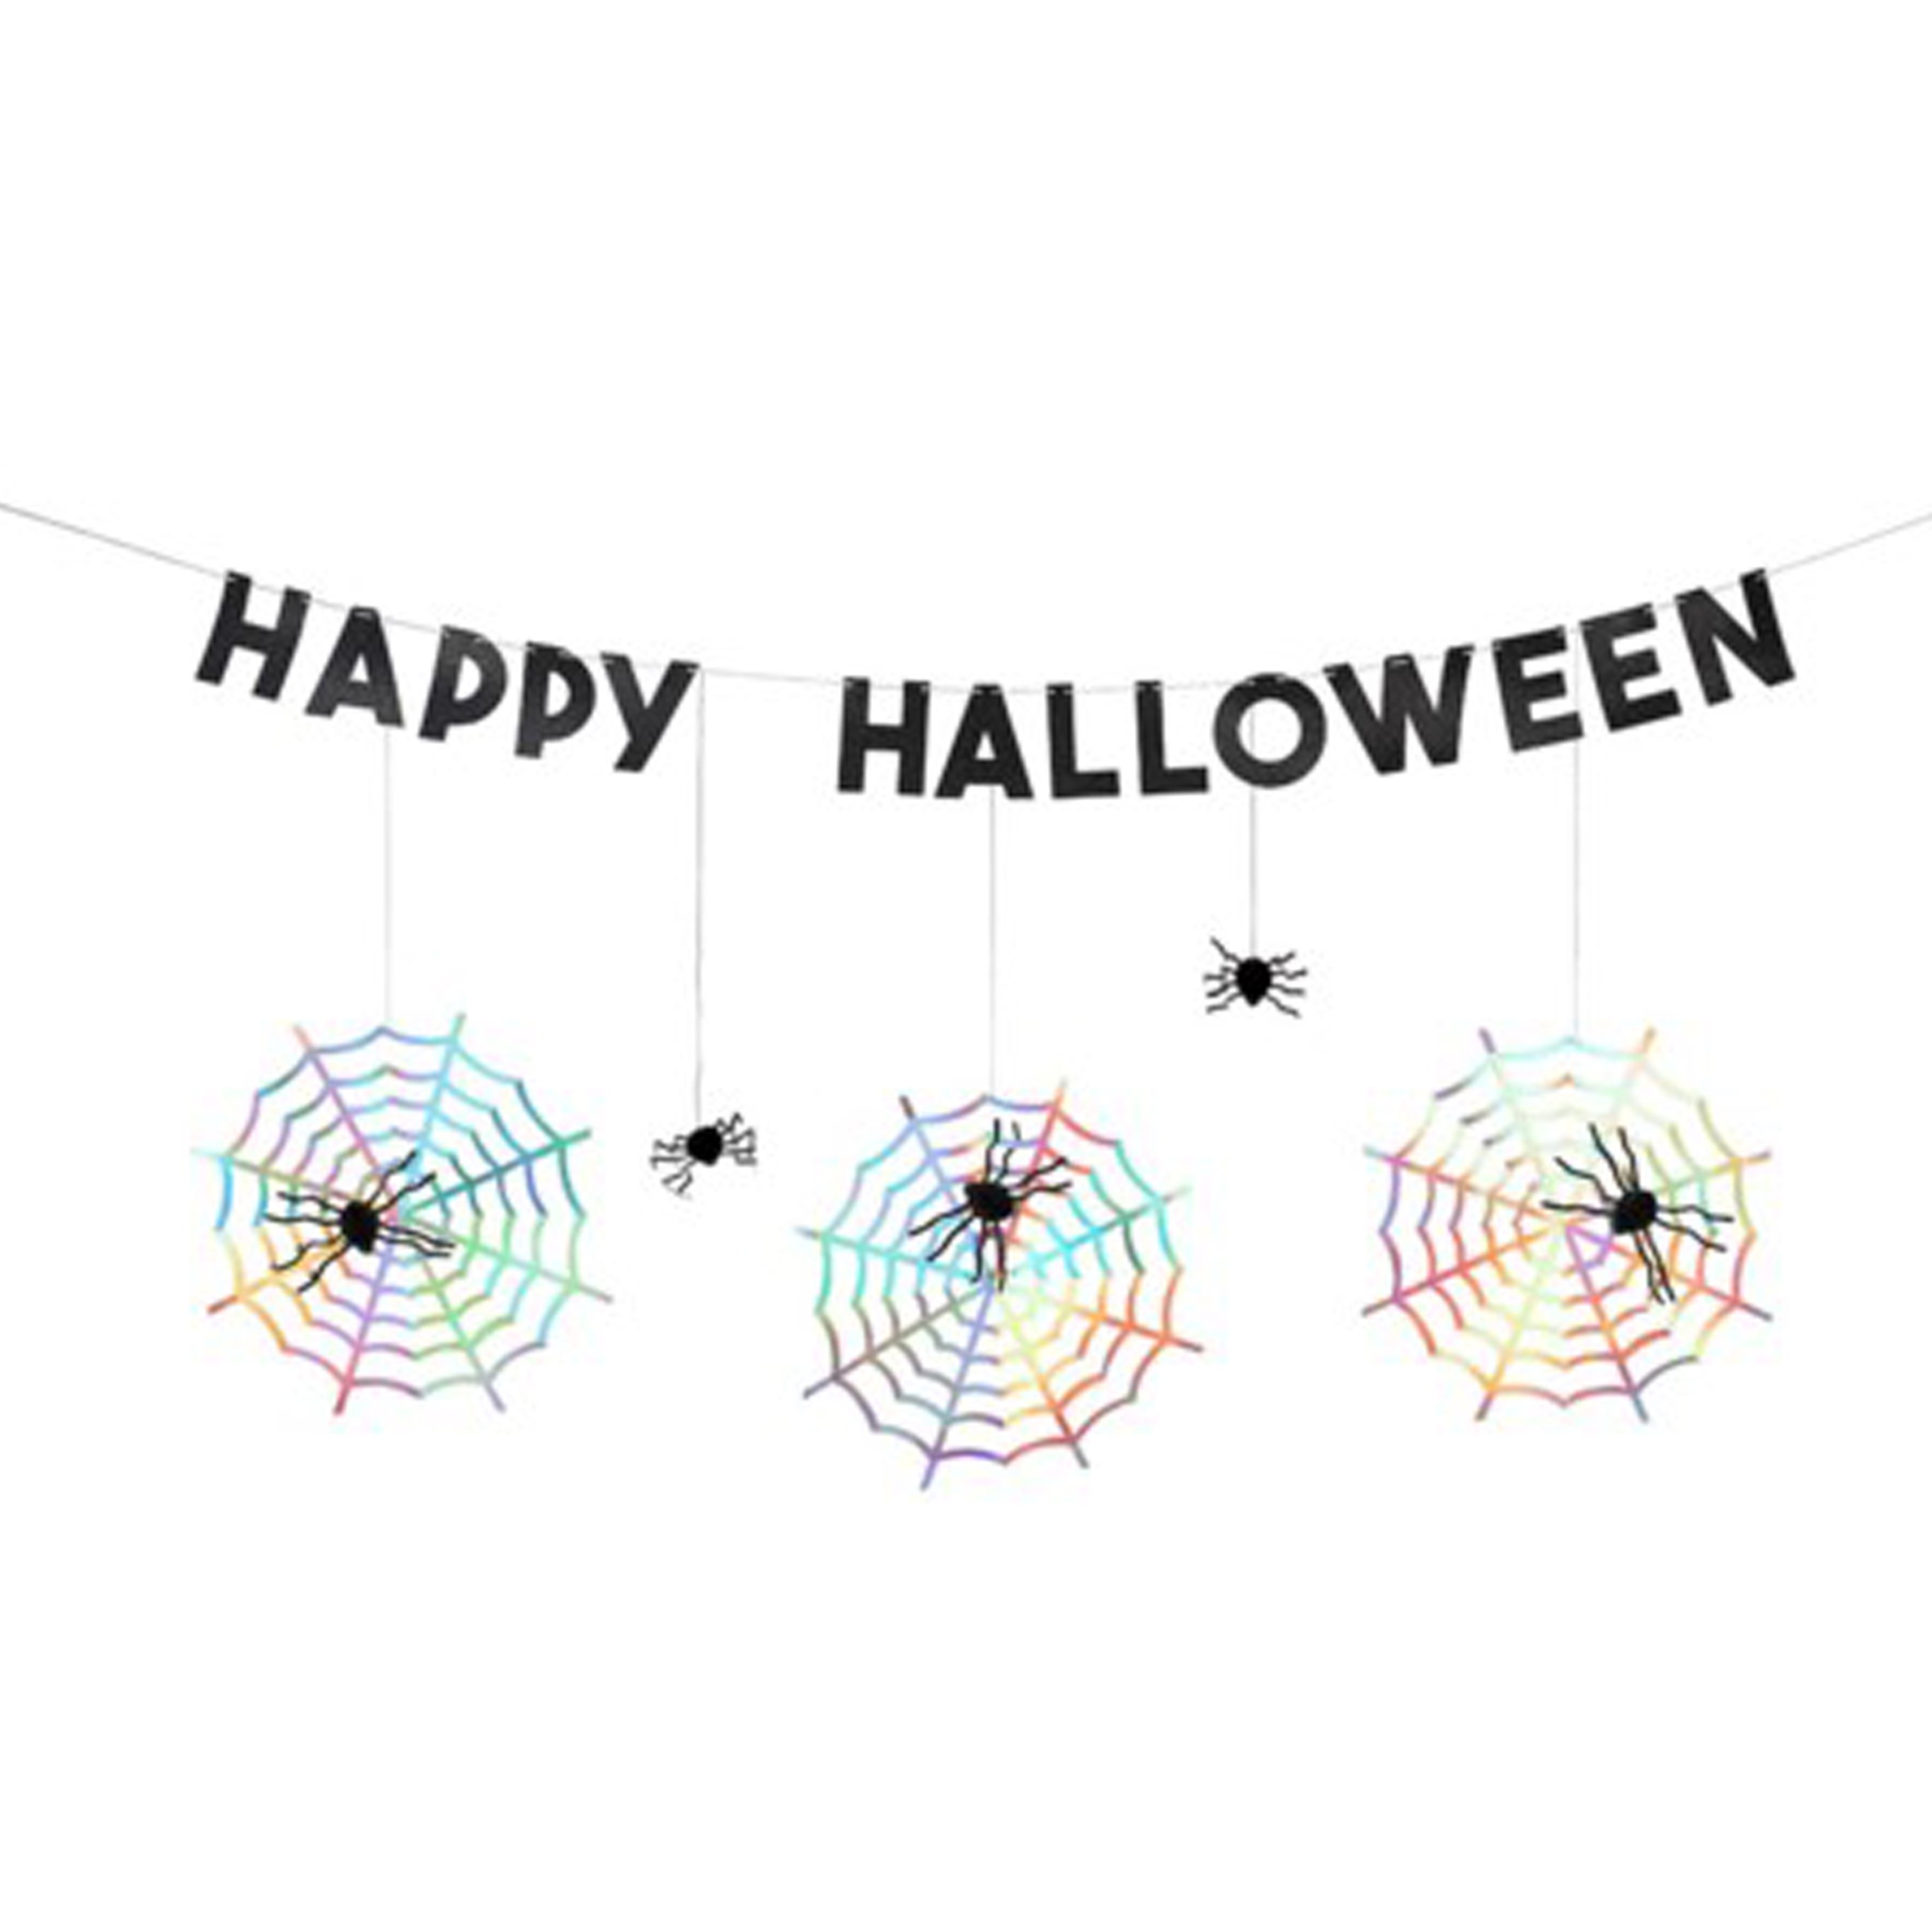 BUY ME / NEW ITEM $29.99 each Holographic Honeycomb Spider Paper Garland